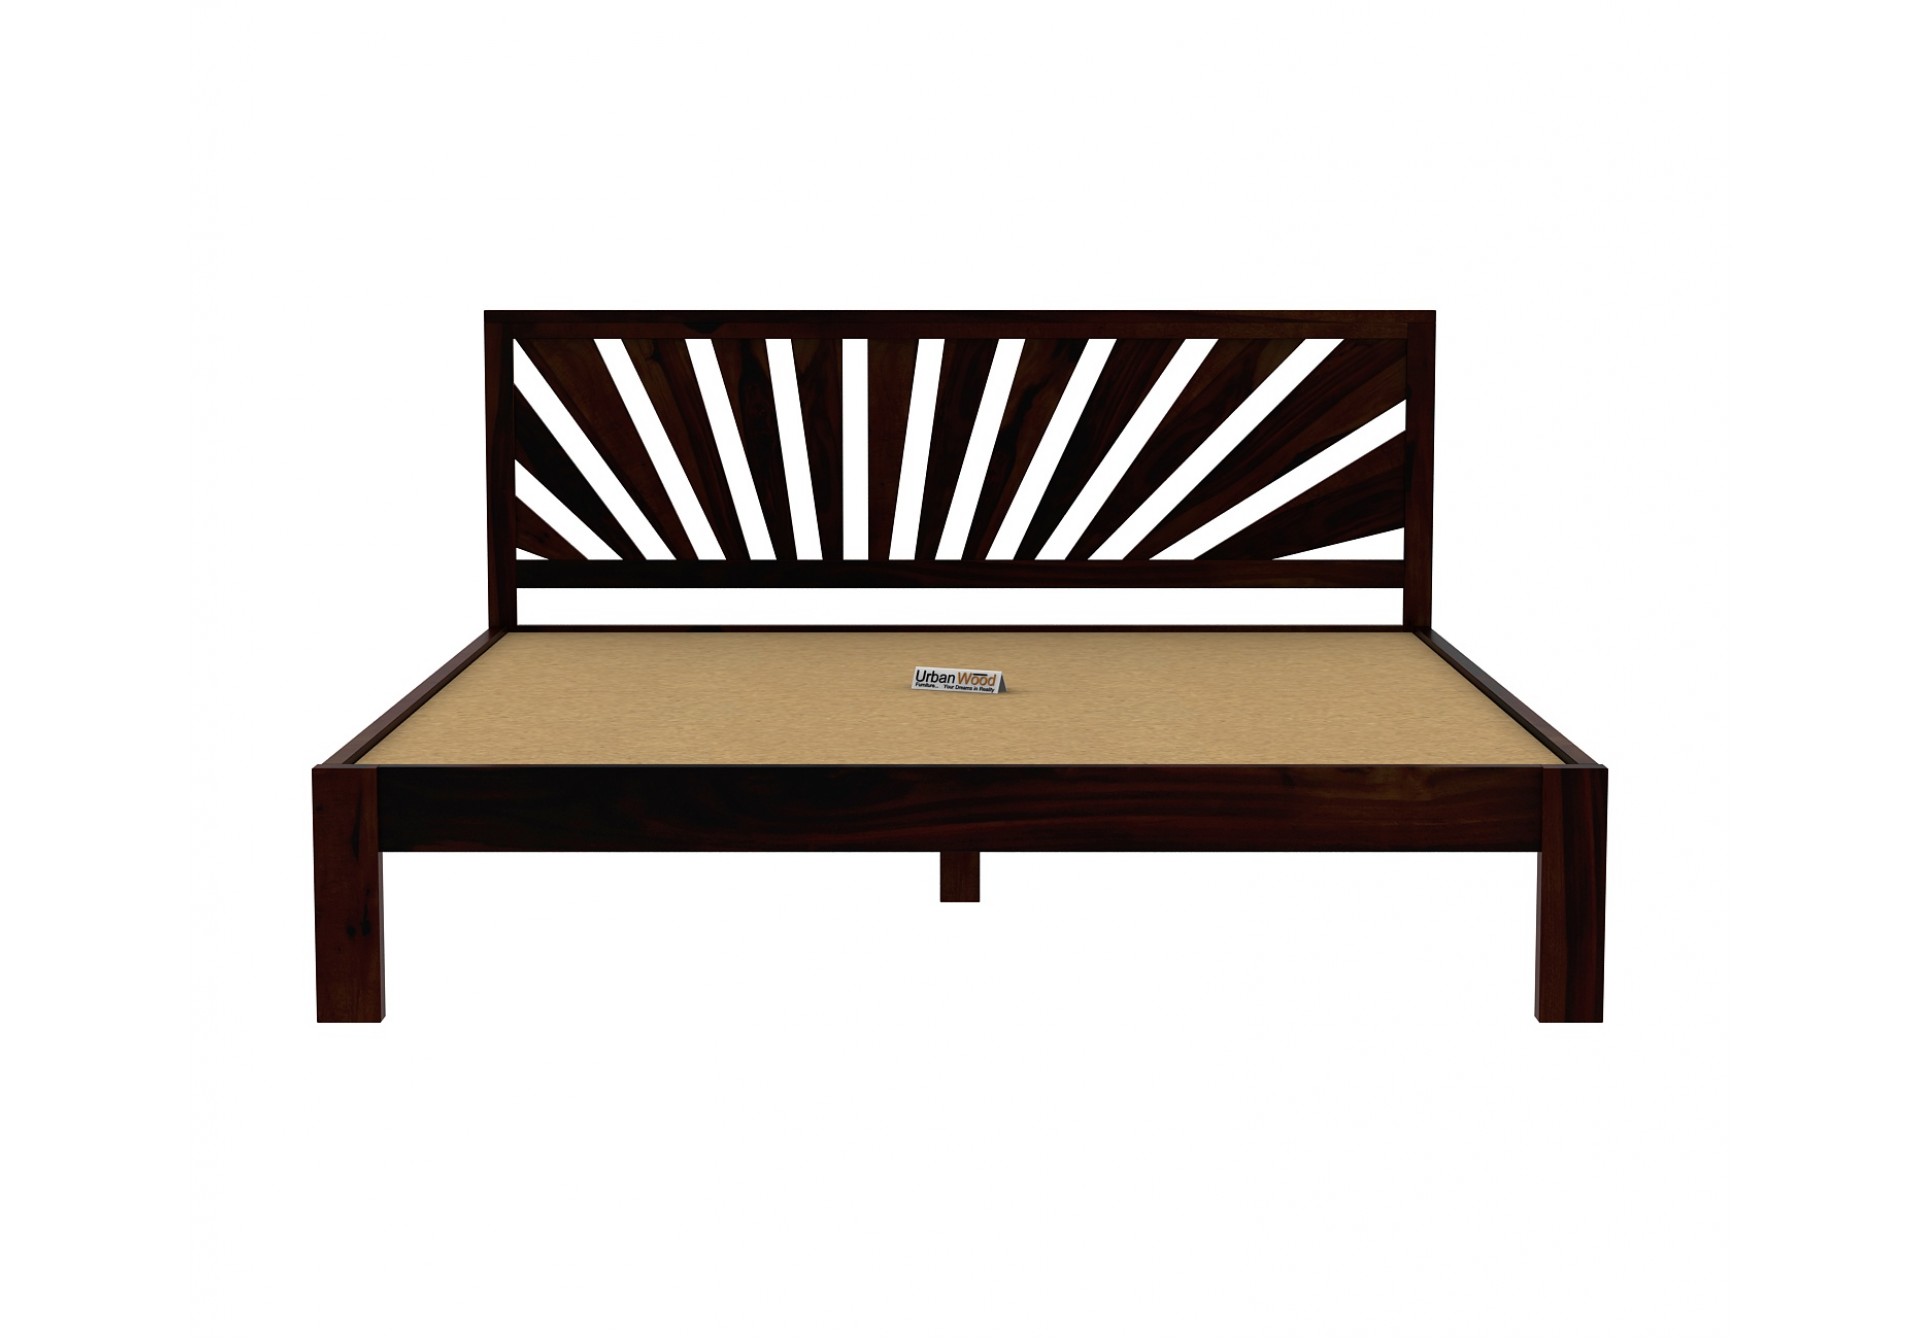 Jerry Wooden Bed Without storage King Size (Walnut Finish)